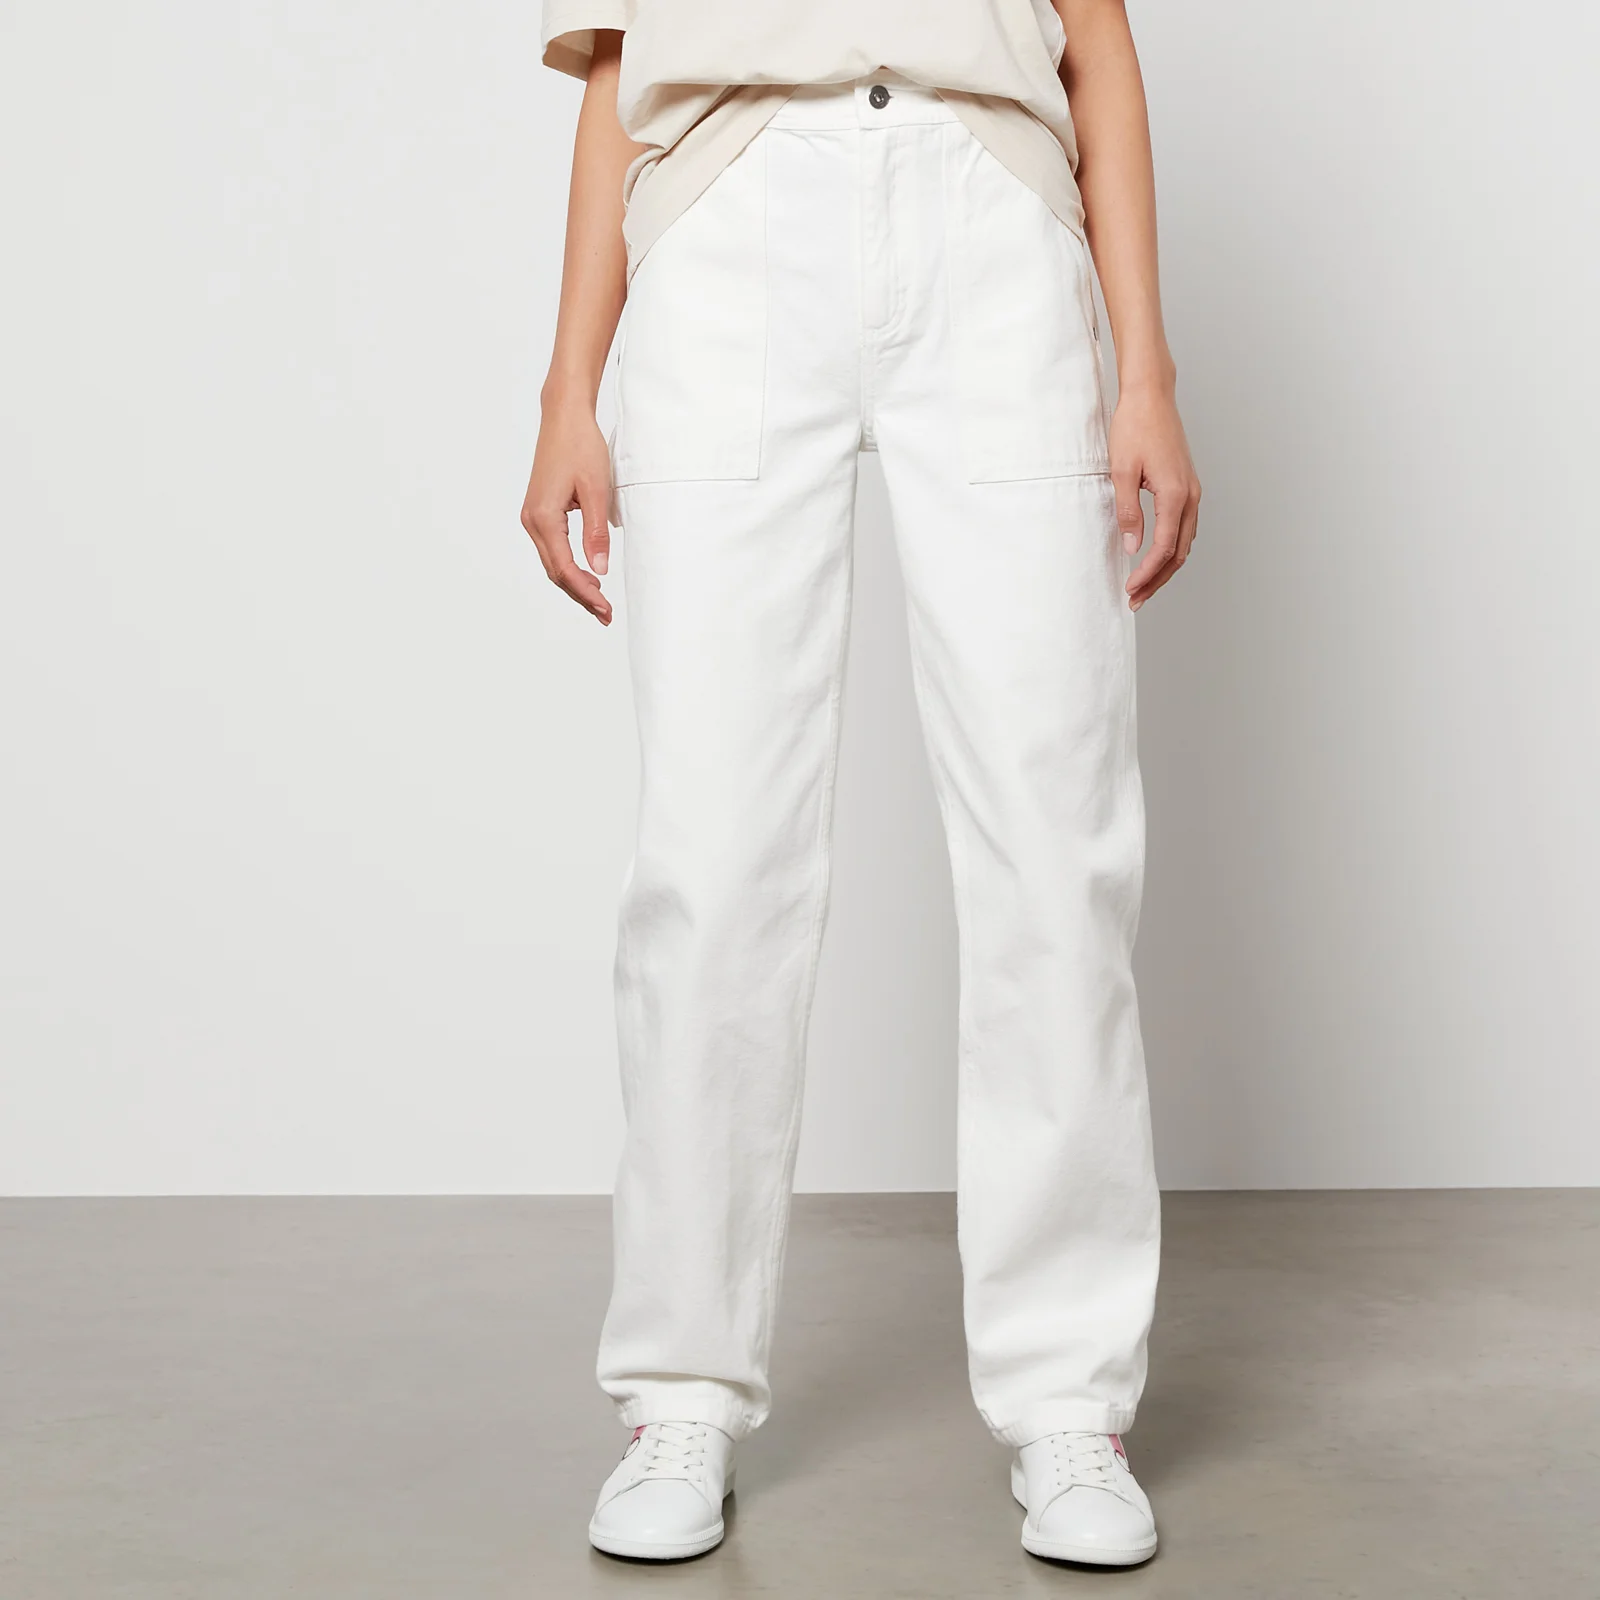 H2OFagerholt Women's Love In Amsterdam Jeans - Off White Image 1